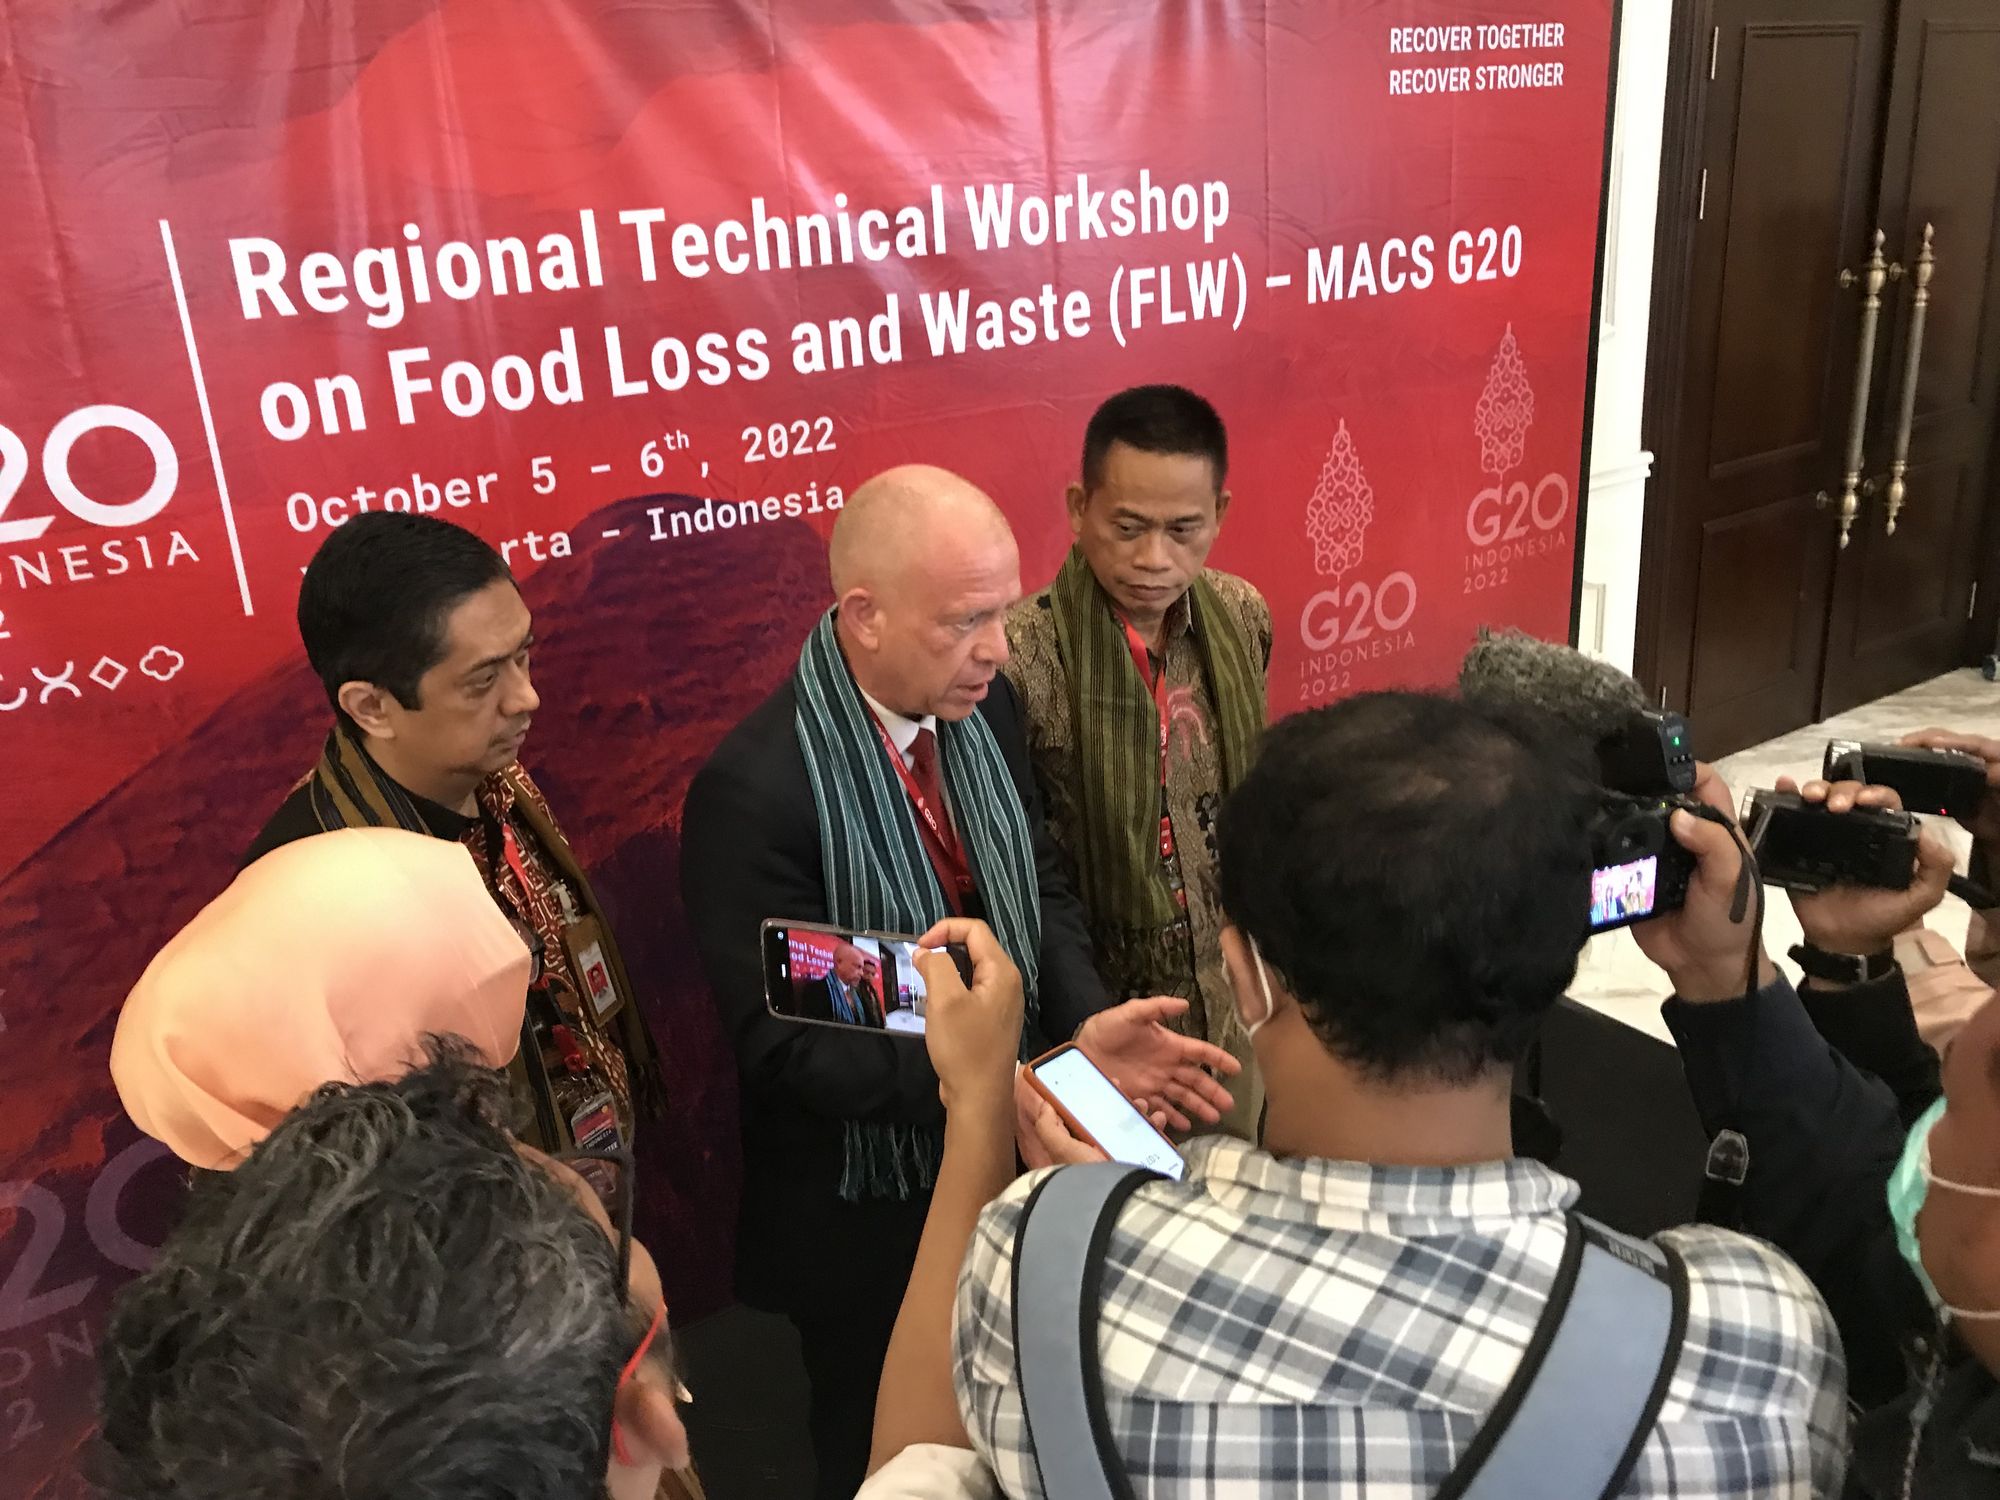 Dr Prayudi Syamsuri, director of ICAPRD, Stefan Lange and Prof Fadjry Djufry, director general of Indonesian Agency for Agricultural Research and Development (IAARD) surrounded by media representatives.